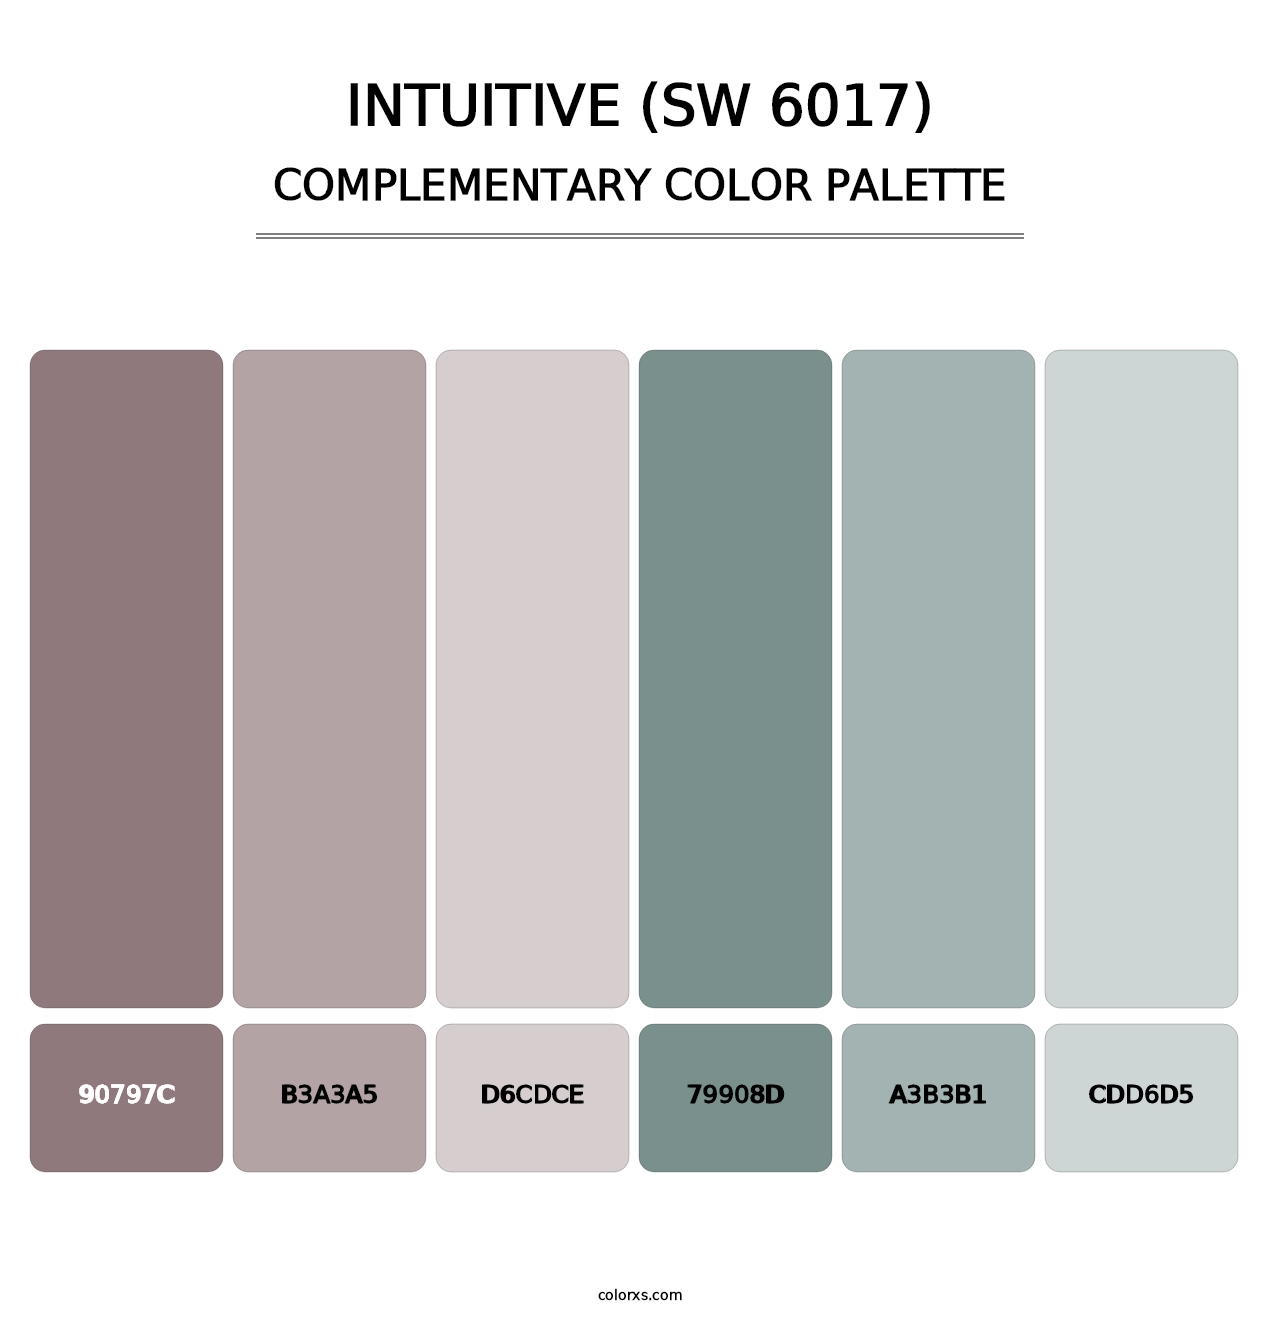 Intuitive (SW 6017) - Complementary Color Palette